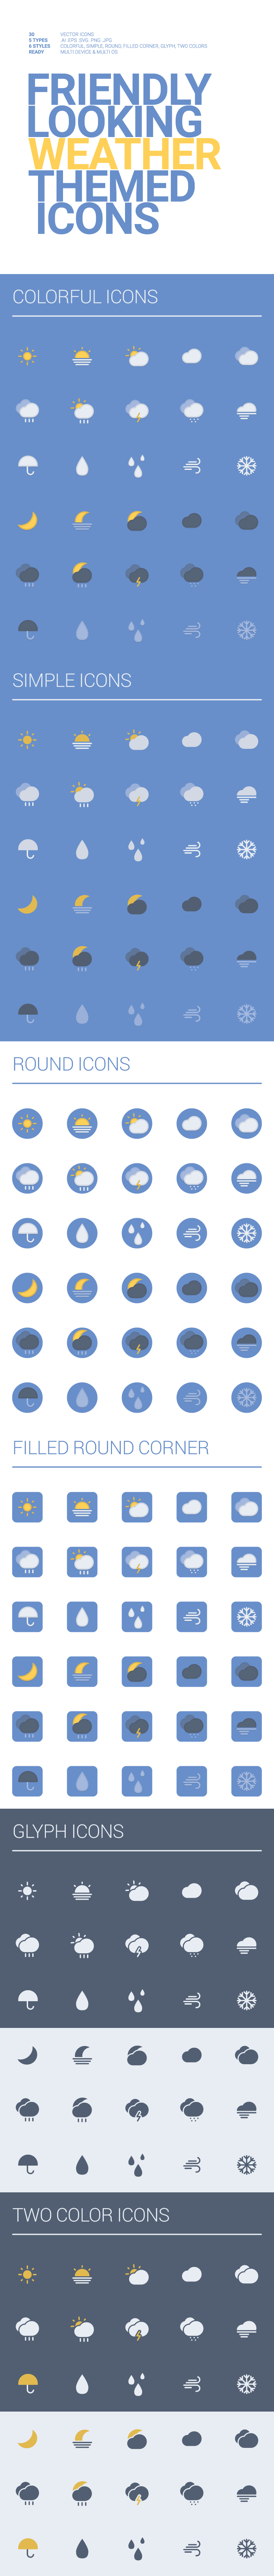 firendly weether icons Icon Sun Sunny rain rainy Umbrella cloud thunderstorms mind fogg colorful glyph